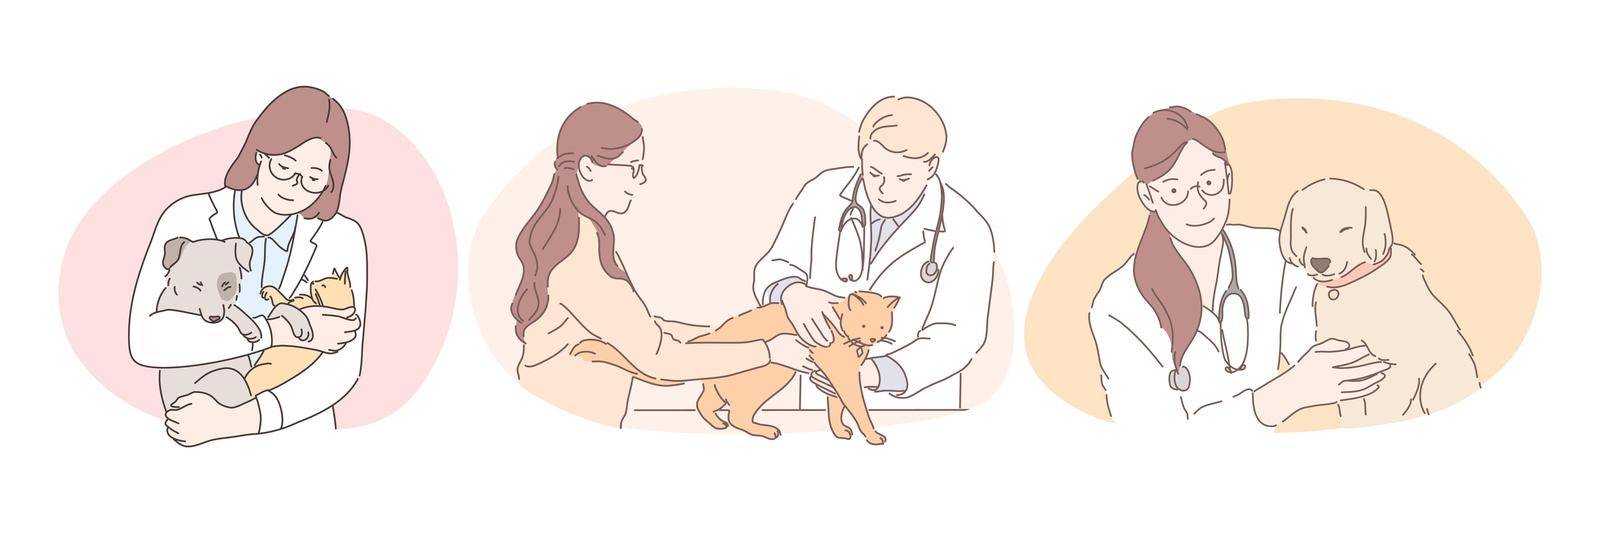 Professional veterinarian with pets during work concept by VECTORIUM